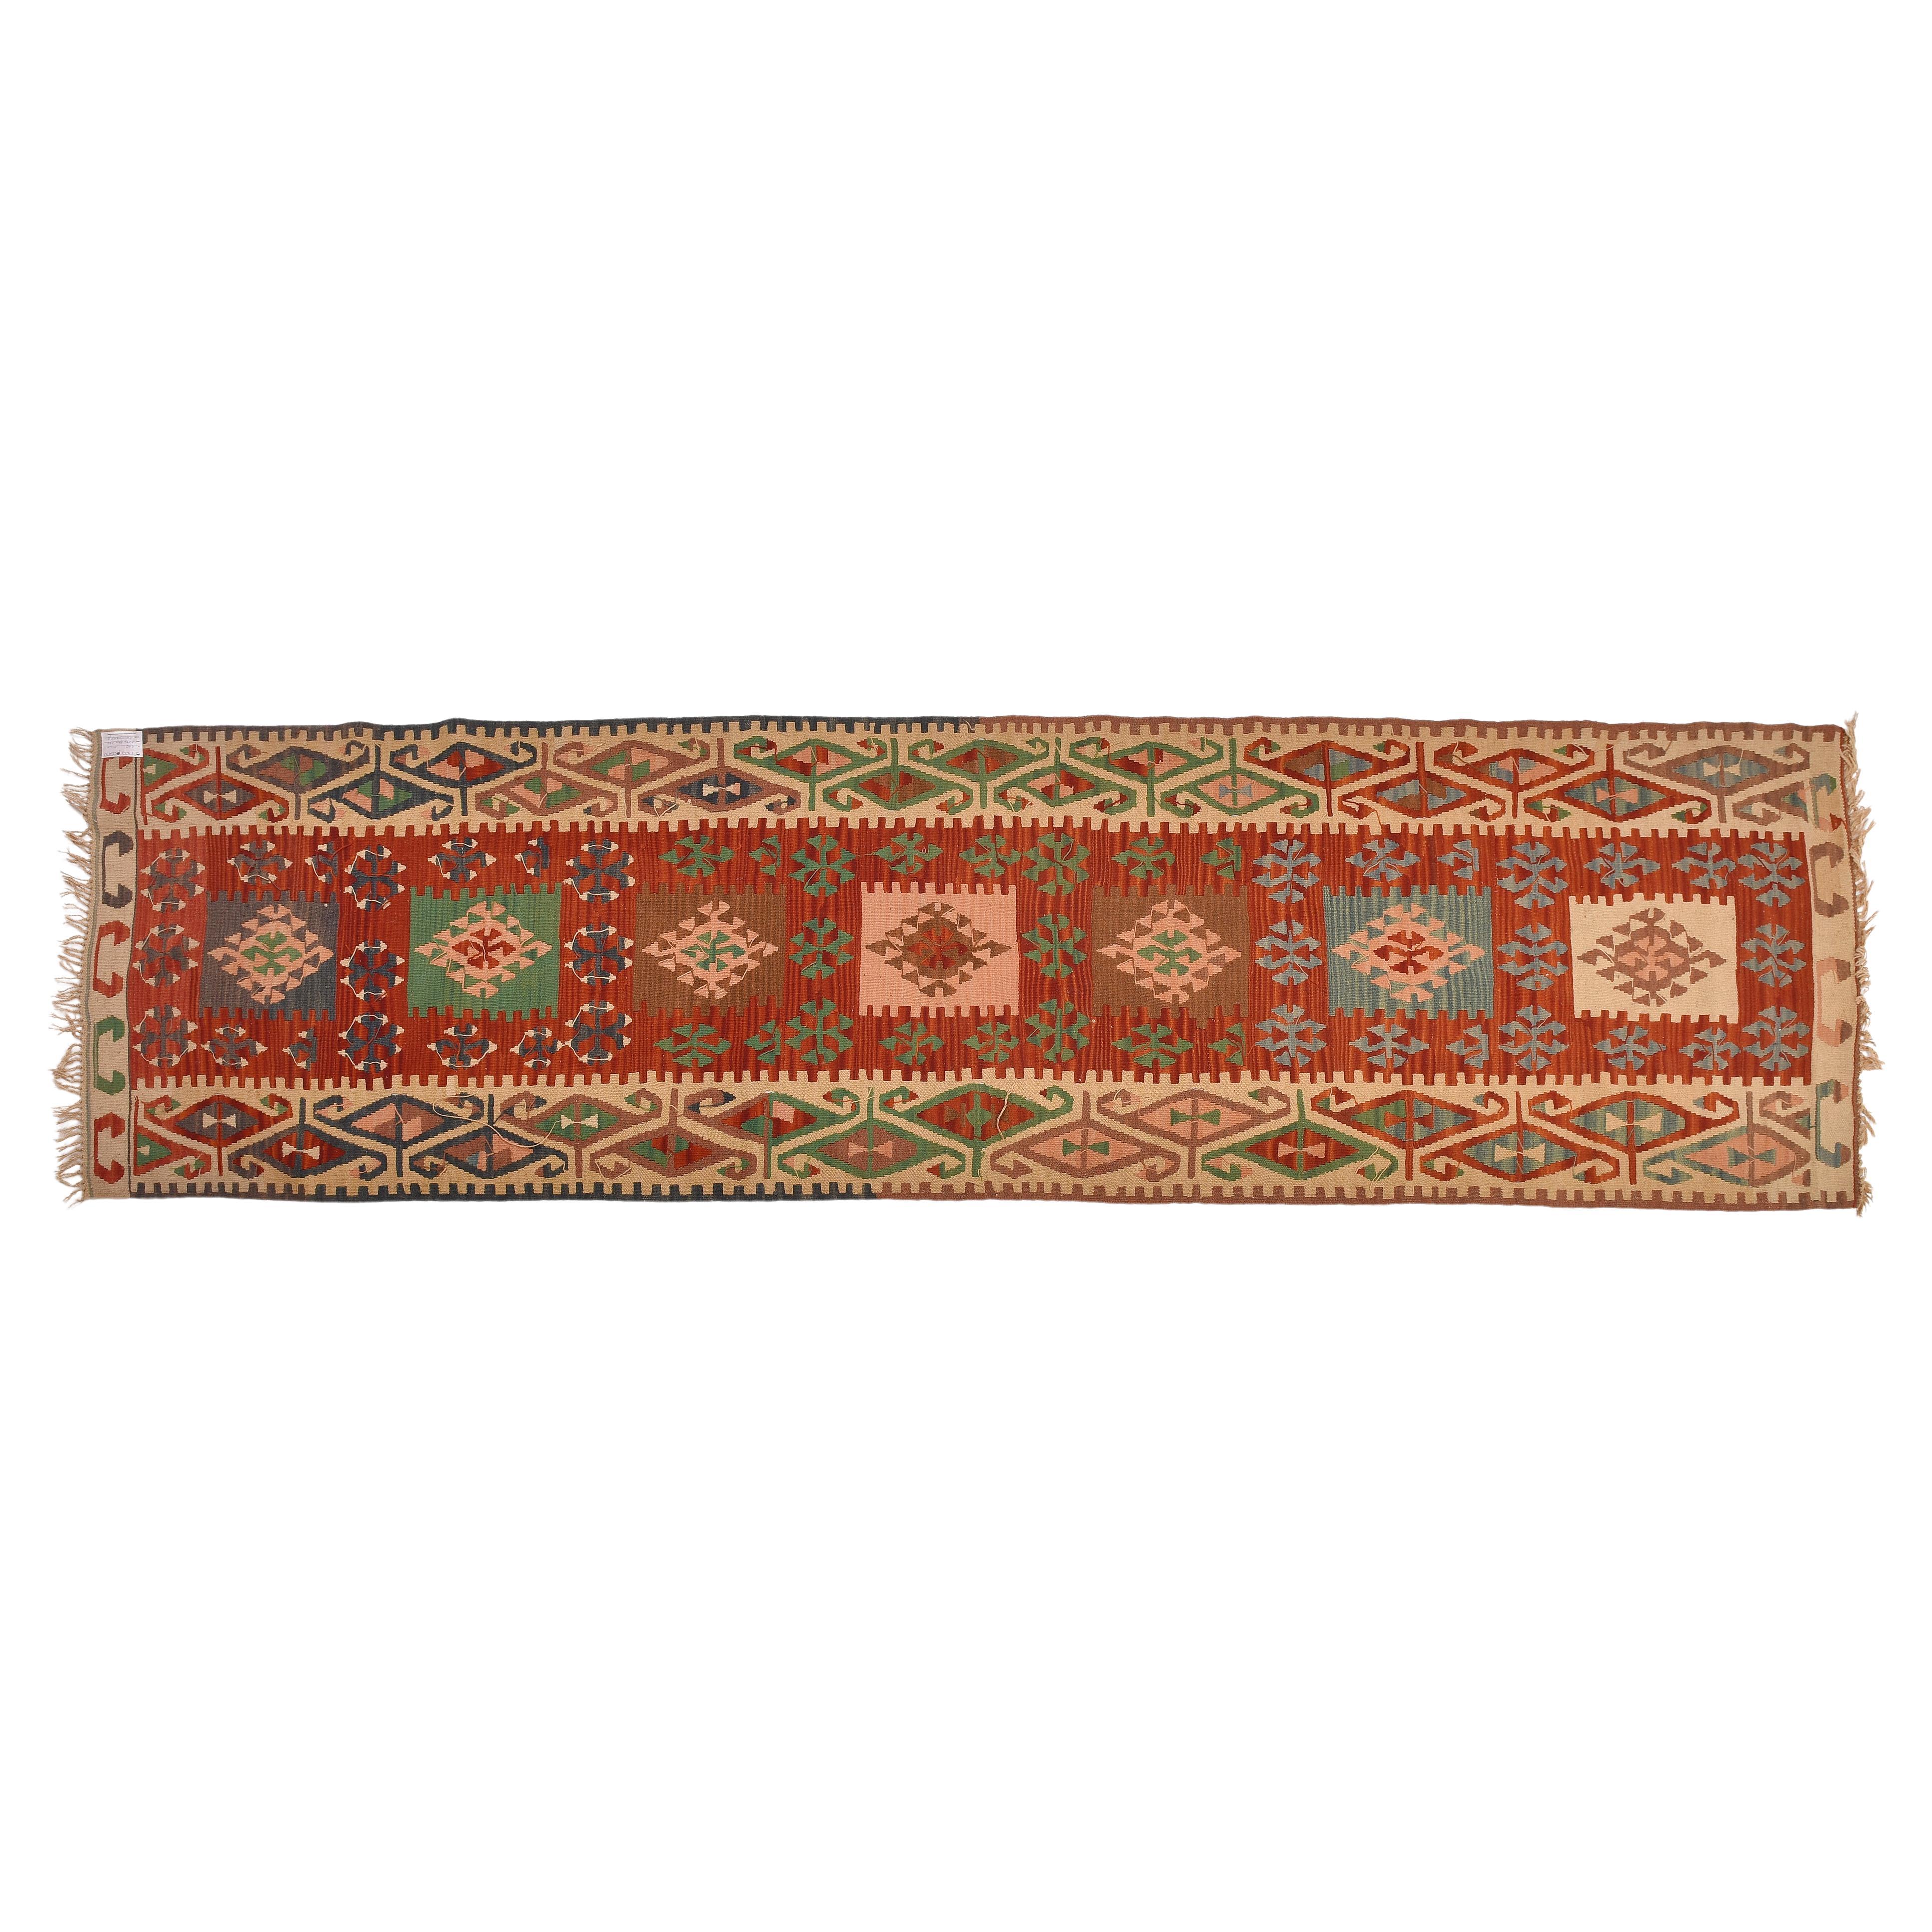 nr. 440 - One of the most famous Turkish kilims, coming from the ancient Caesarea of the Romans.
Predominantly female workmanship, very accurate : but now (they say) no longer easily available.
That's a good price for closing activities !!